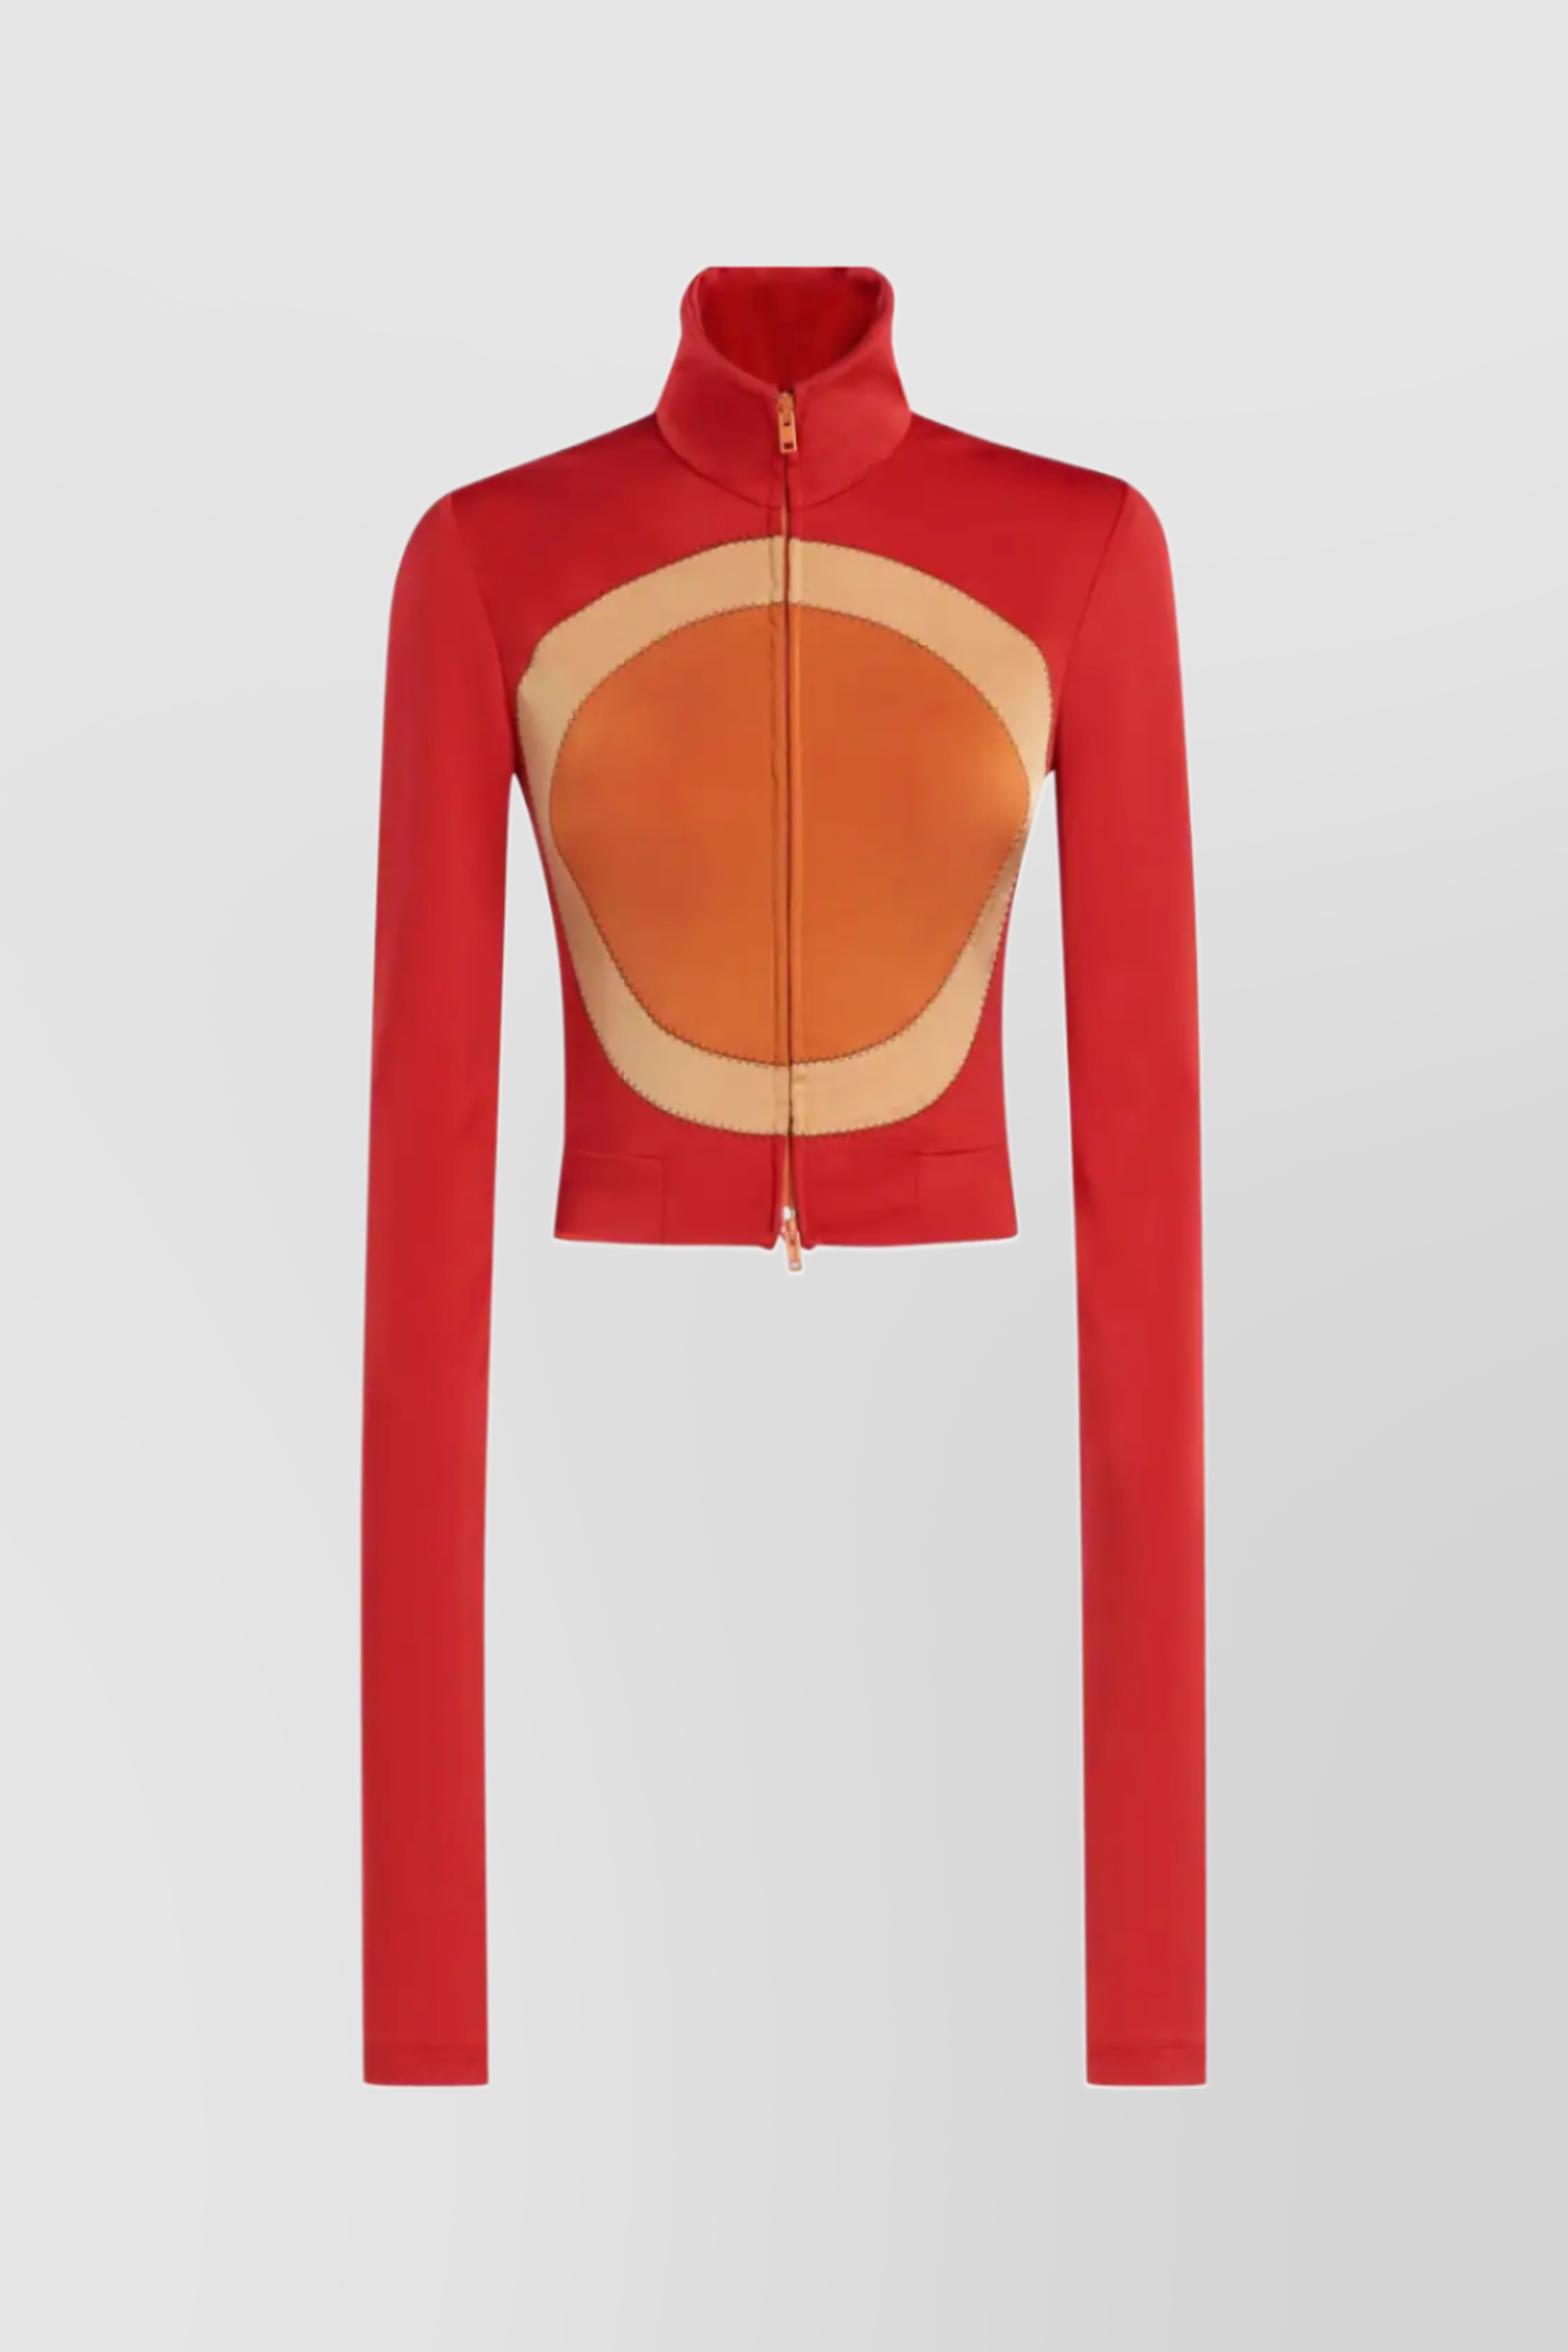 MARNI FITTED FLUID JERSEY HIGH NECK JACKET